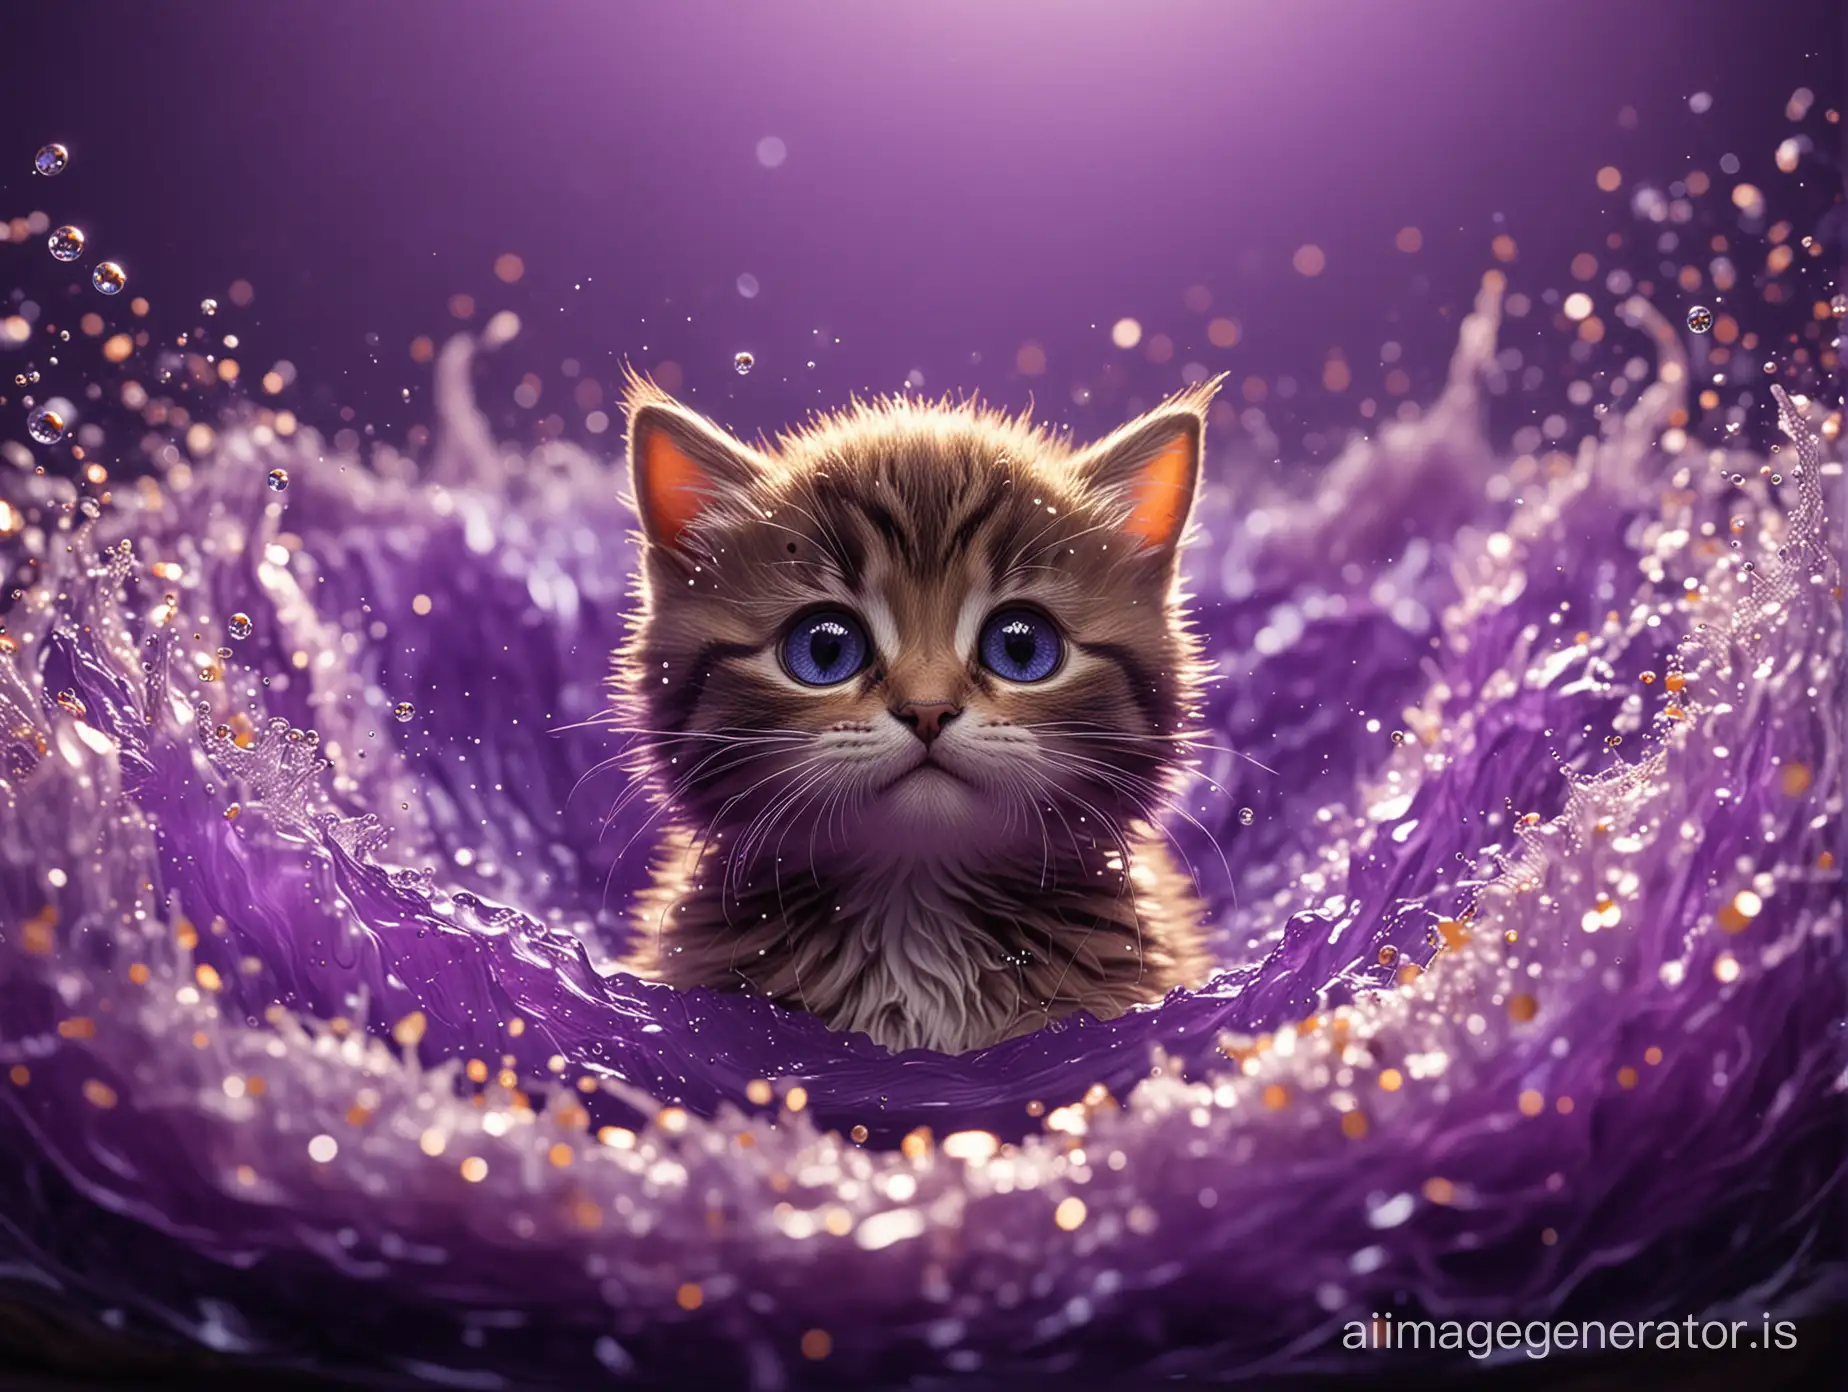 Adorable-Baby-Cat-in-Enchanting-Purple-Flow-Toy-Art-with-Expressive-Eyes-and-Whirlwind-Sparks